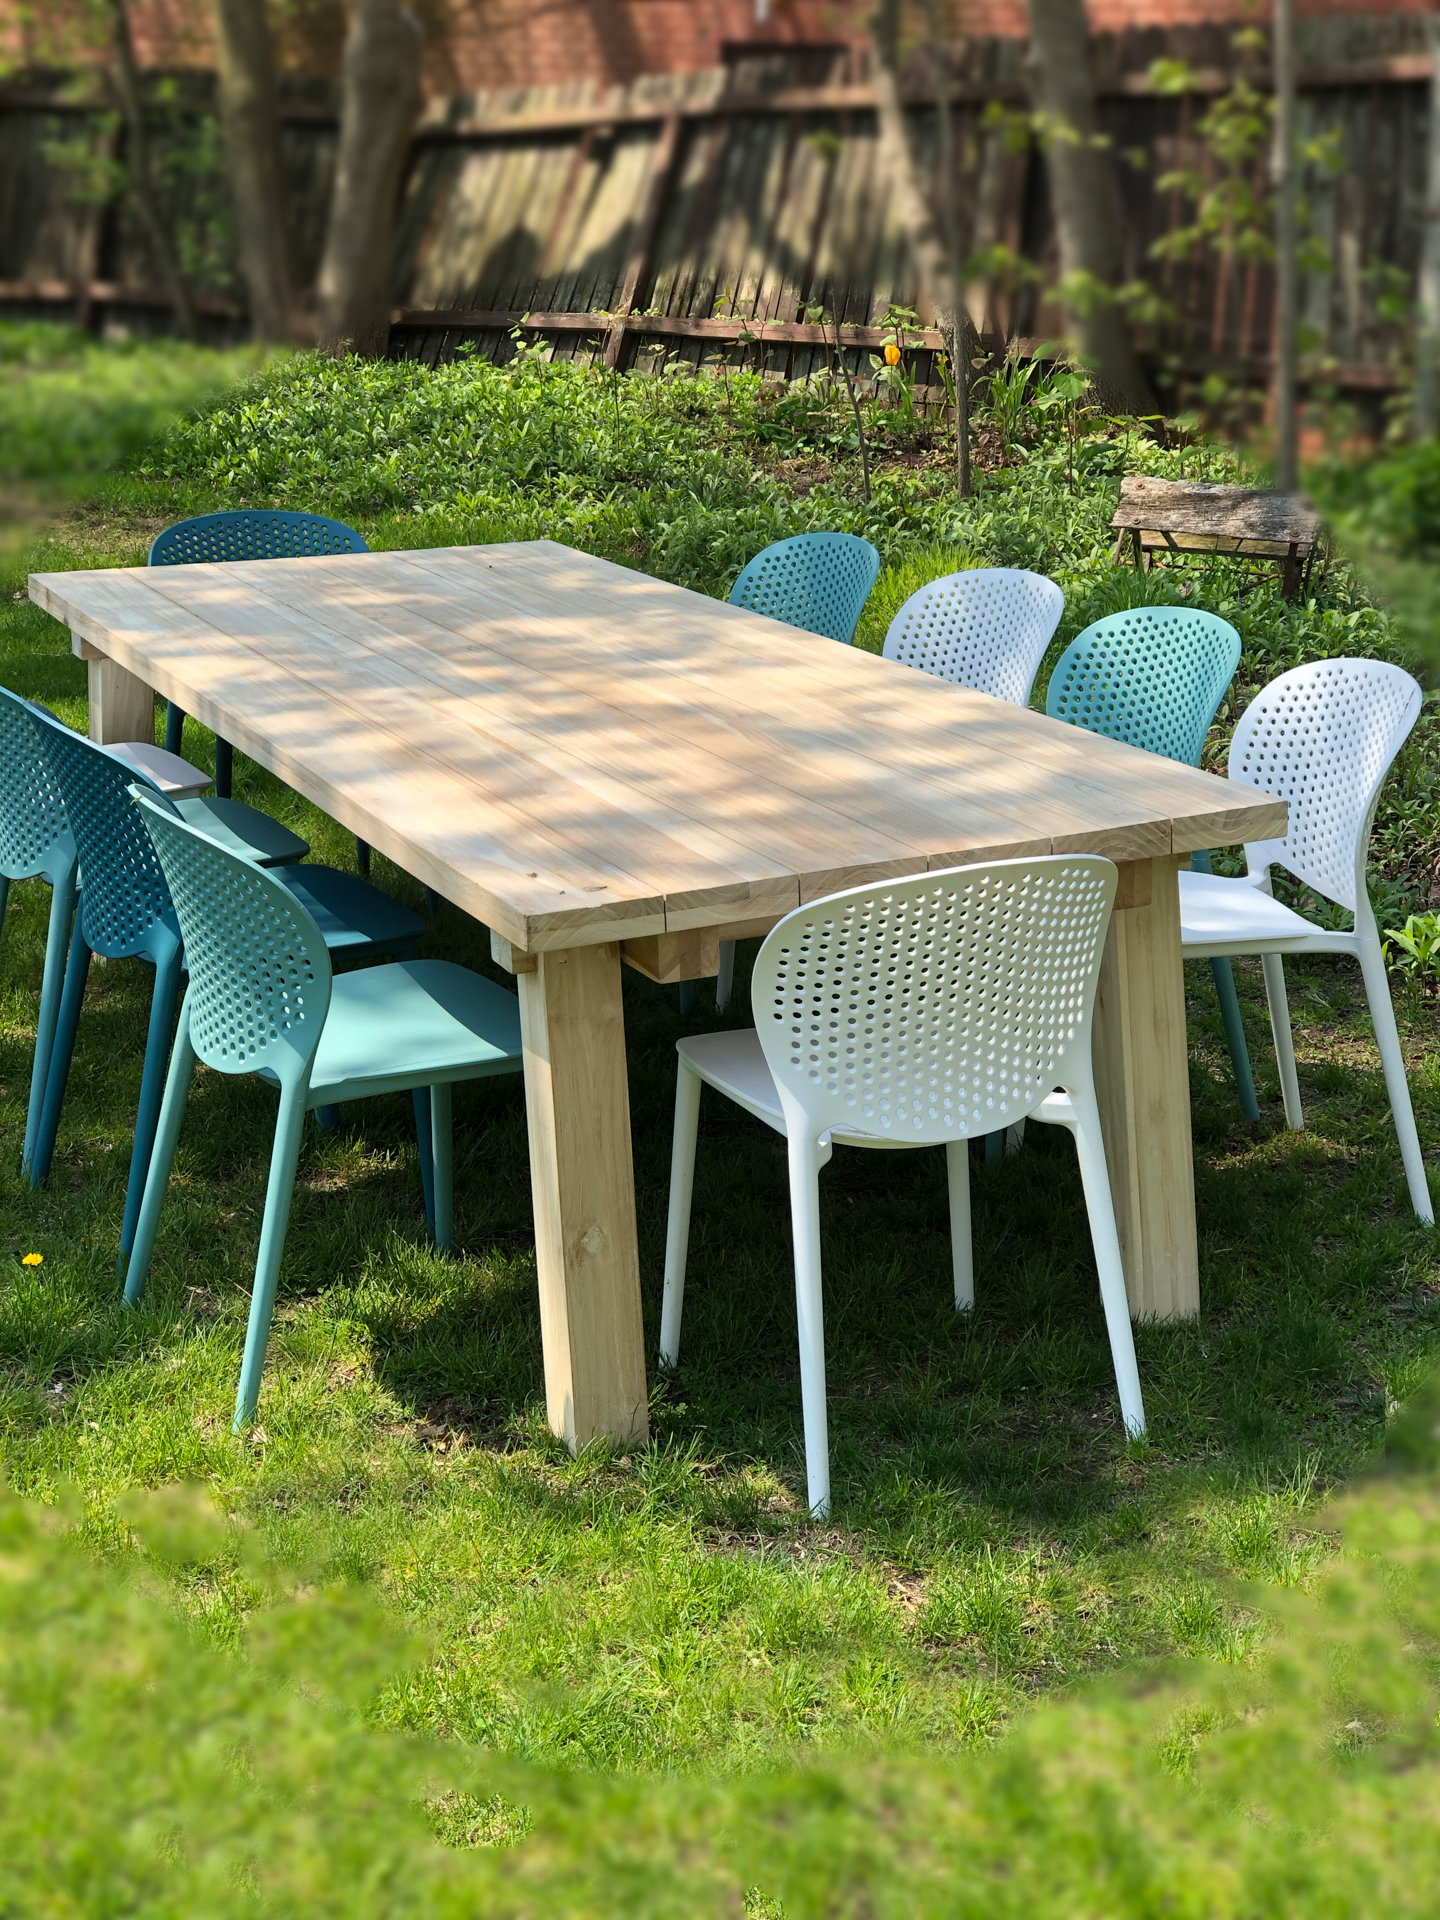 Seasonal al fresco dining at the community table in the backyard at The Ferg vacation rental